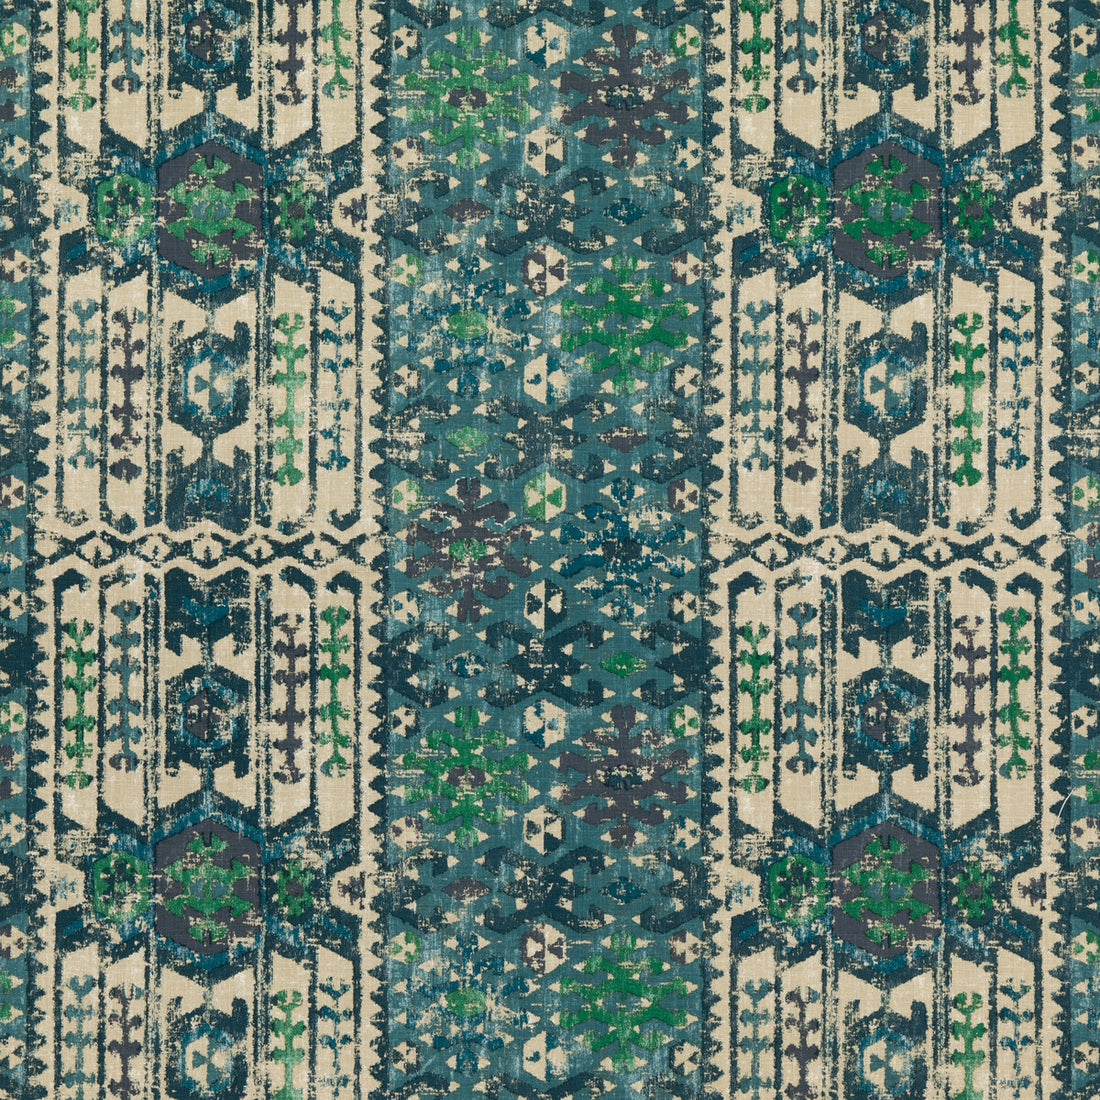 Kilver fabric in teal color - pattern FD309.R122.0 - by Mulberry in the Modern Country I collection